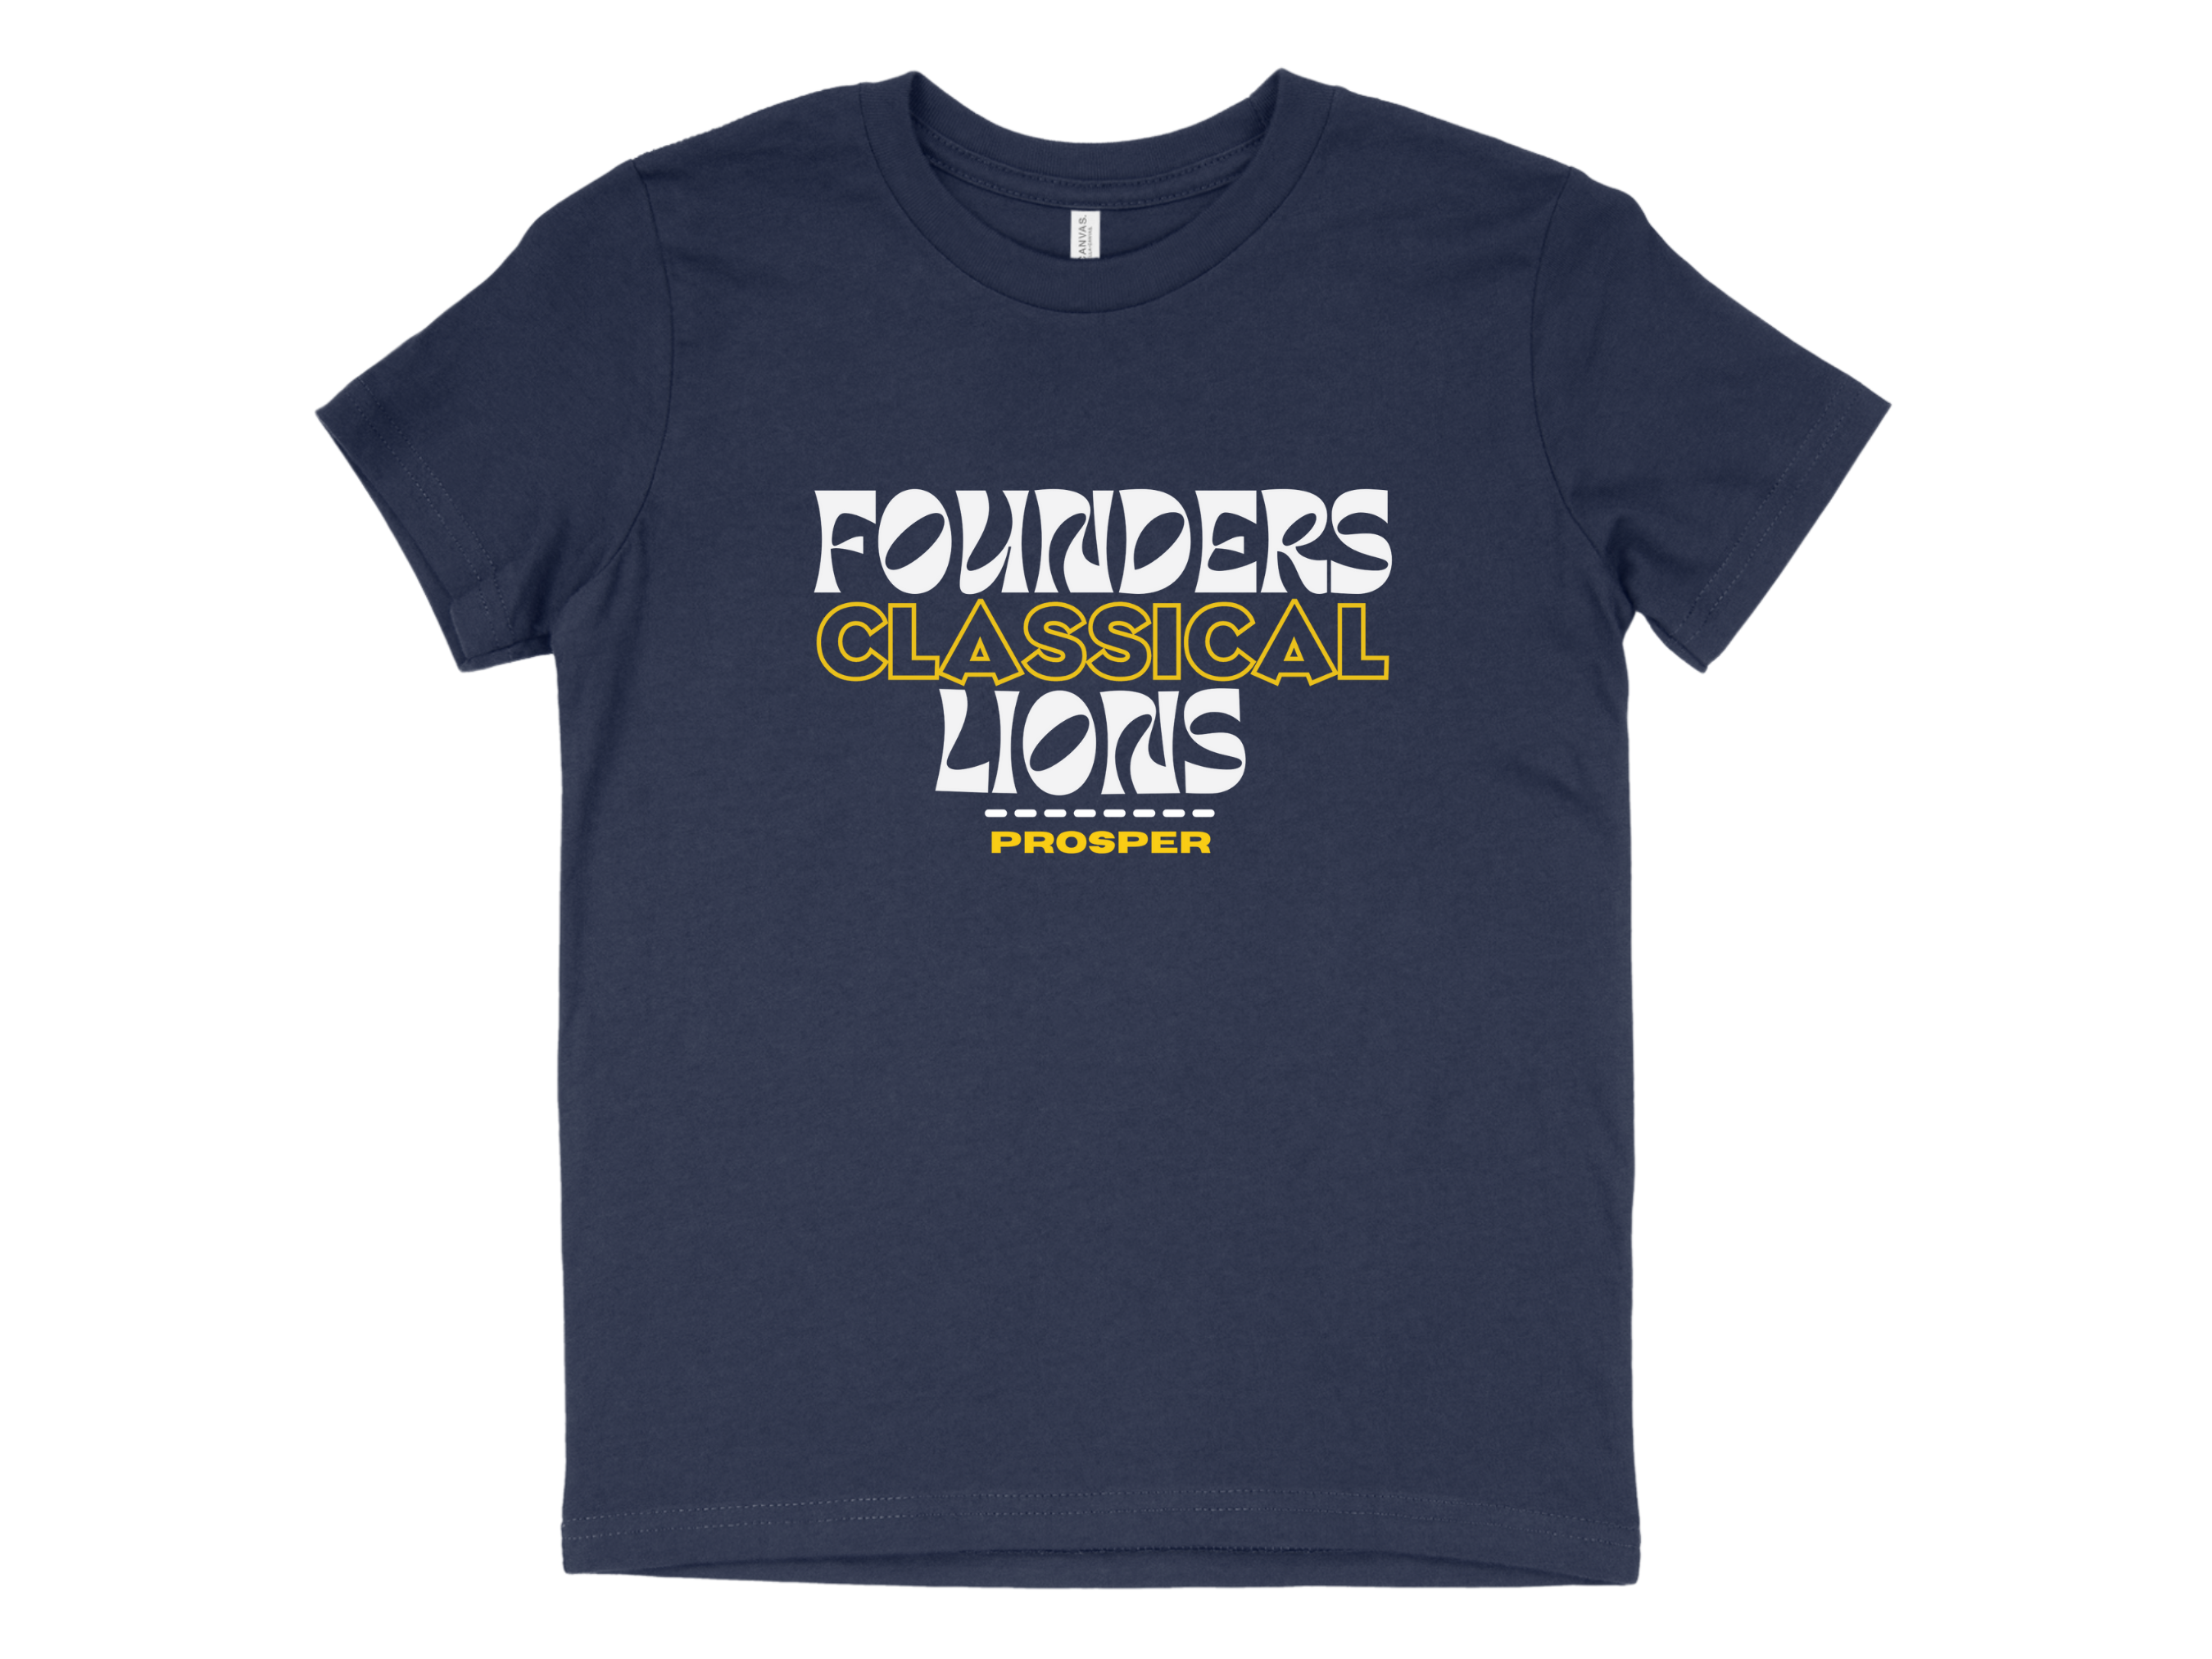 Founders Classical Lions Prosper - Navy  Large Image